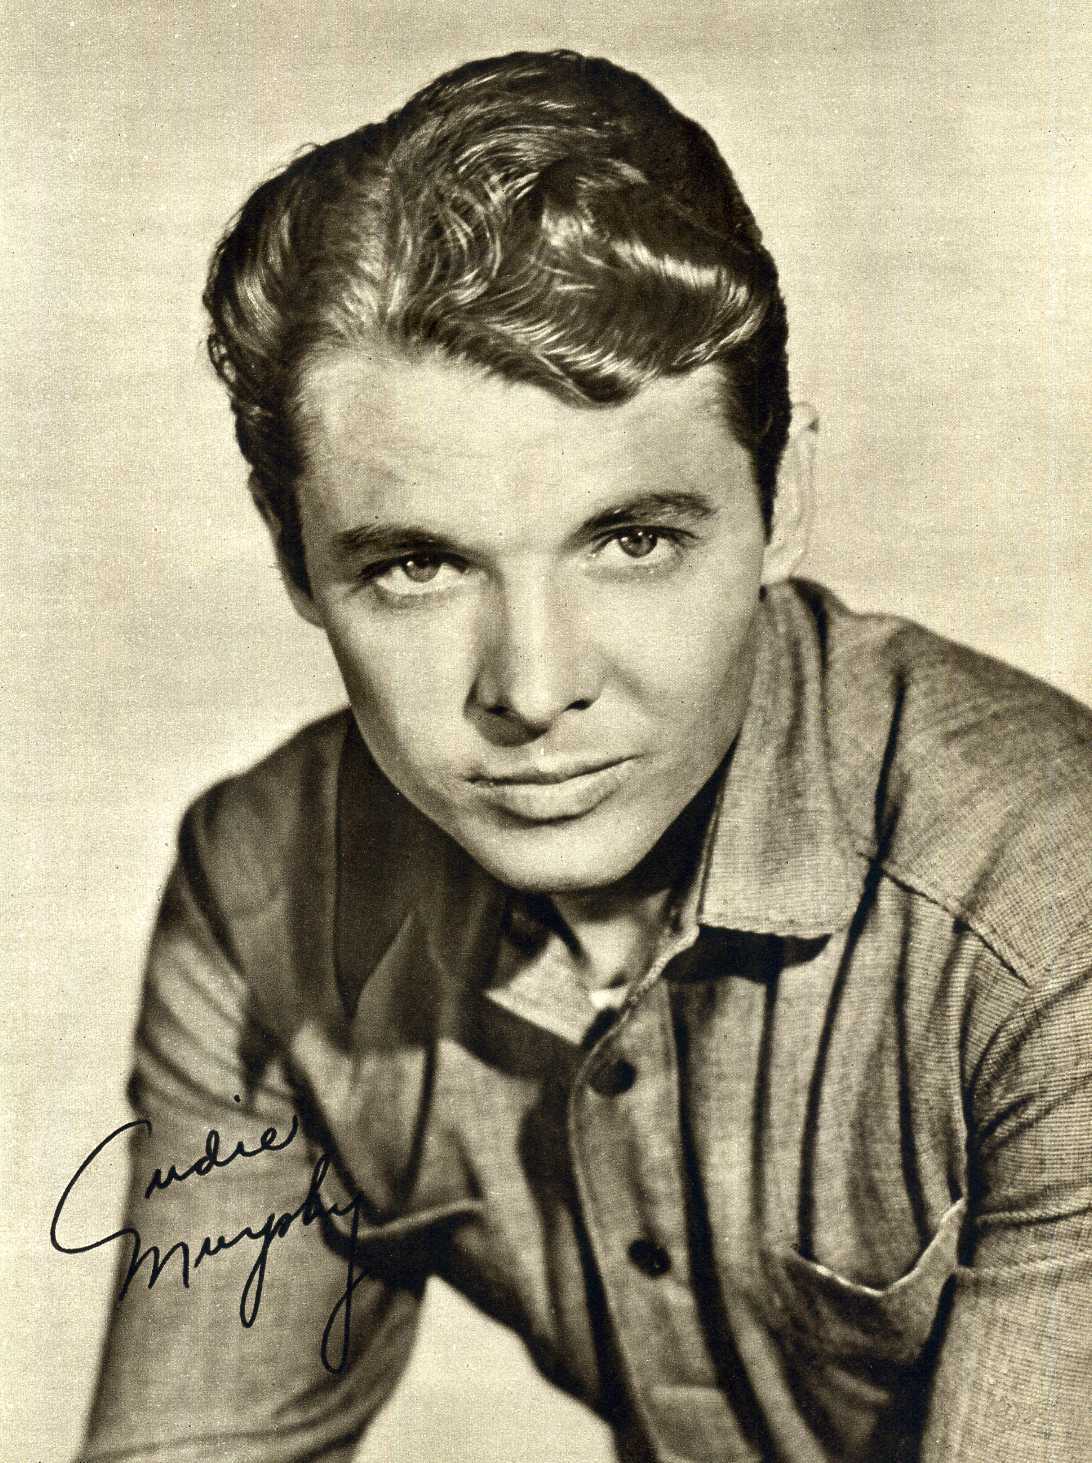 AUDIE MURPHY Signed Photo Poster paintinggraph - Film Actor & Highly Decorated Soldier preprint